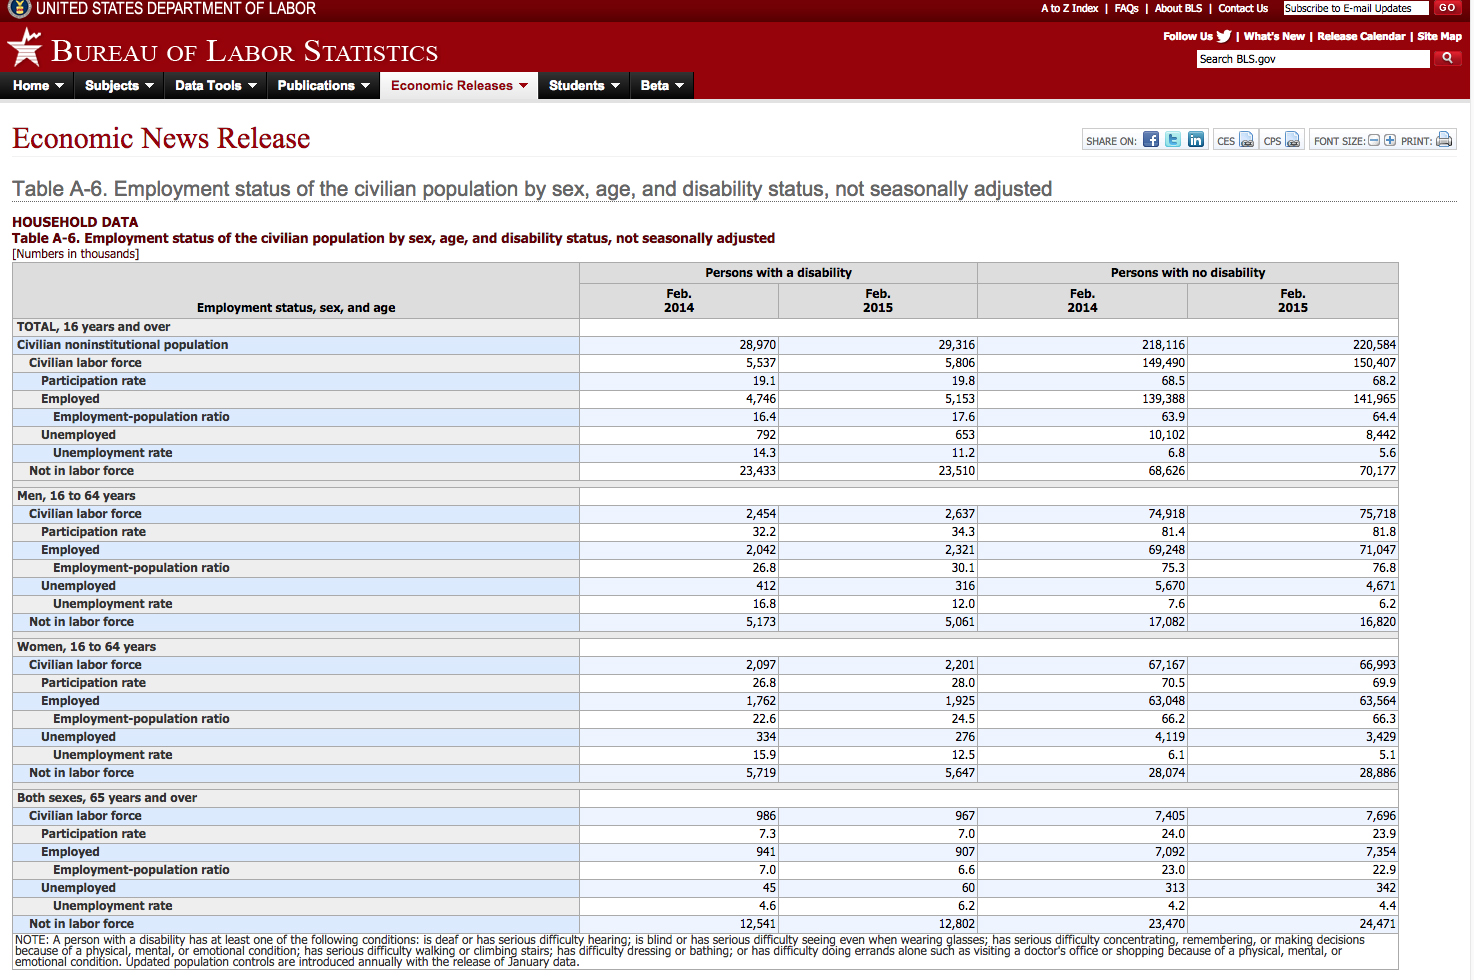 A Bureau of Labor Statistics web page illustrating data on the employment status of people with disabilities. 